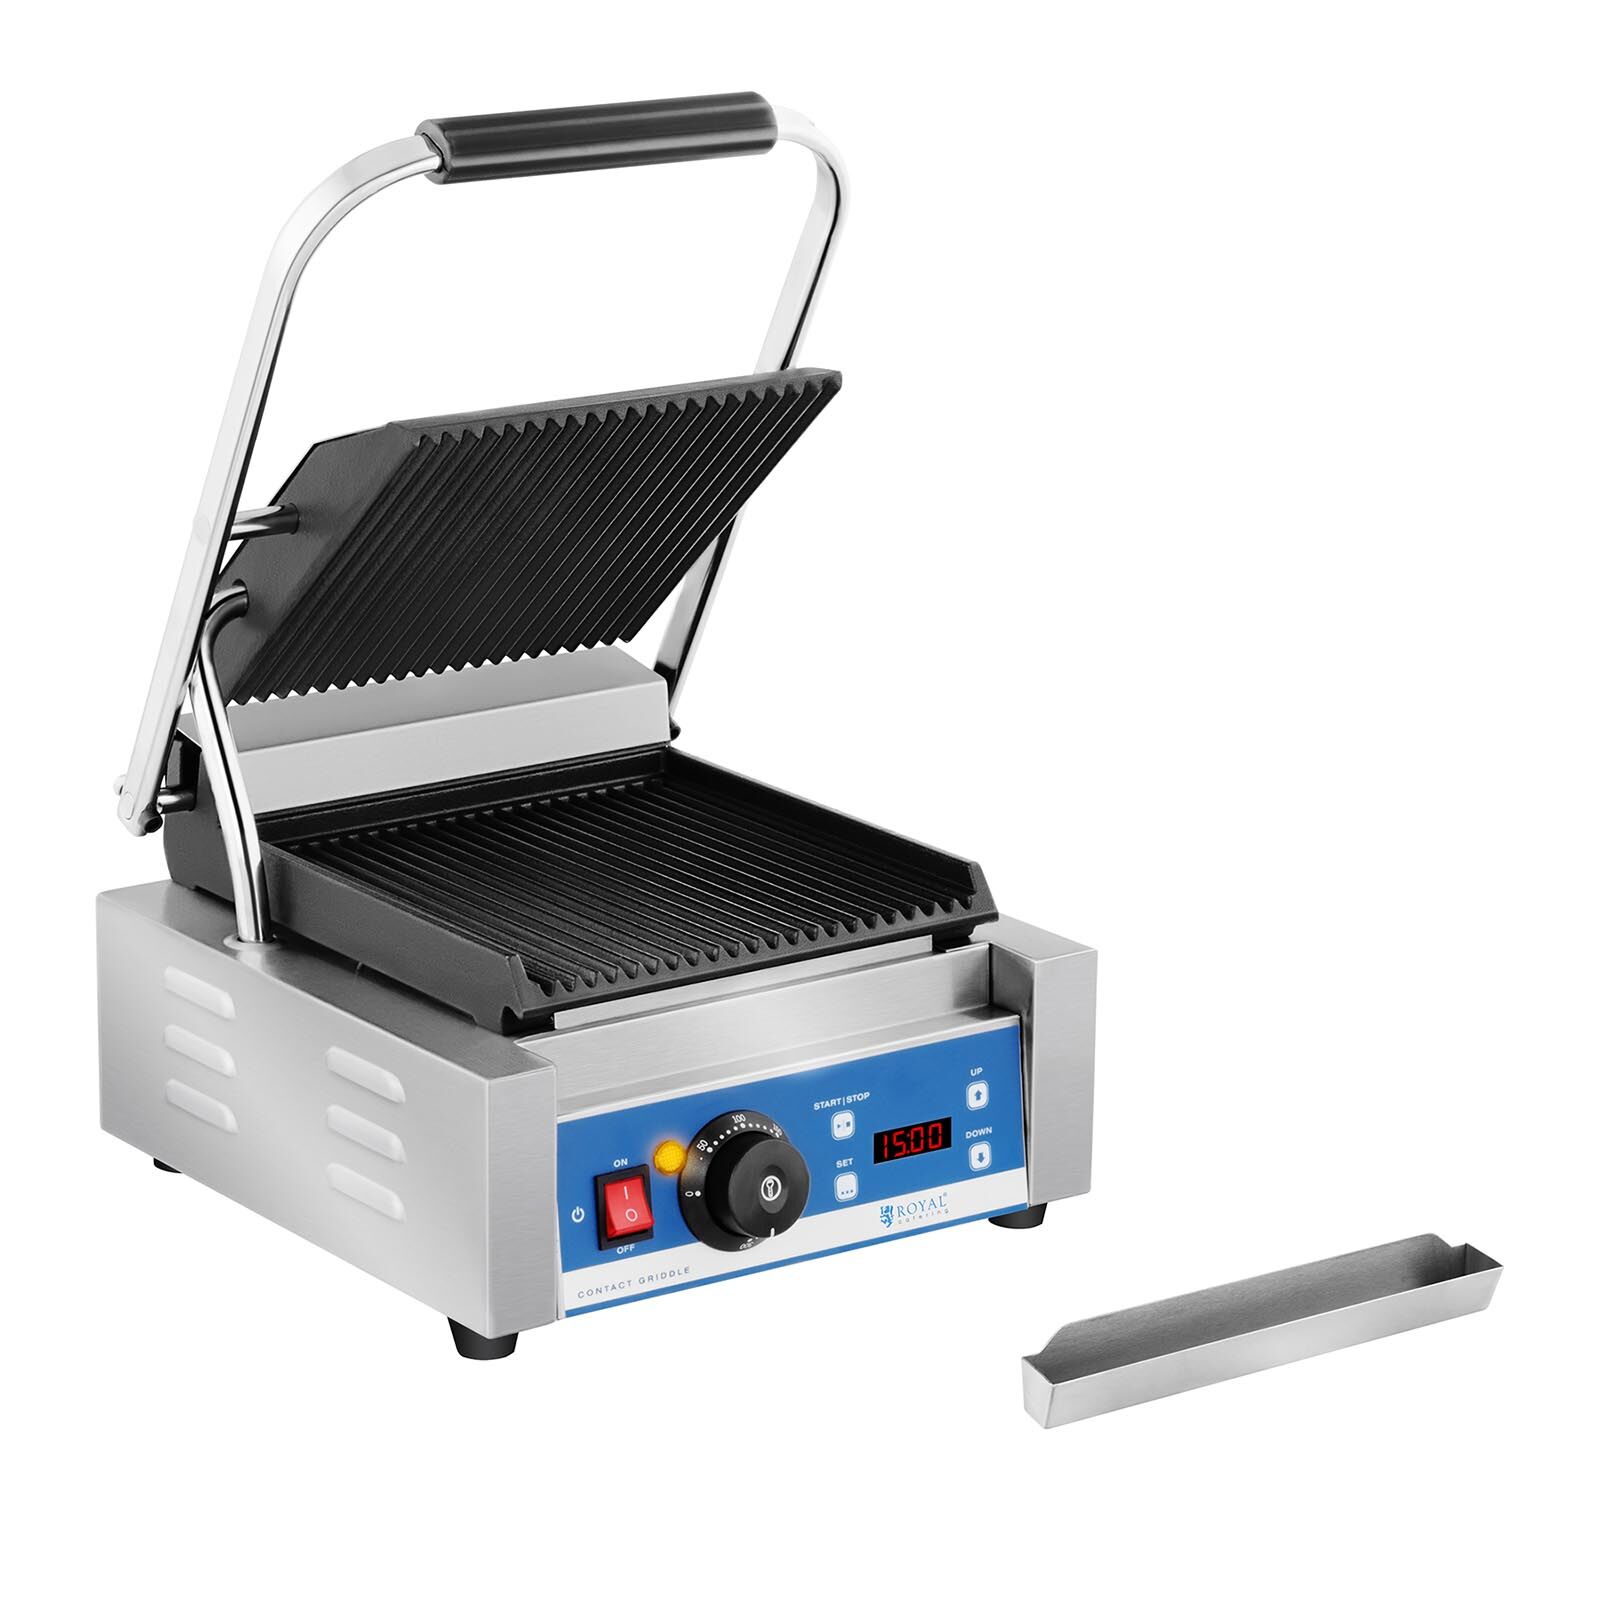 Royal Catering Contact grill - griddle - timer - 1,800 W RCKG-2200-GY